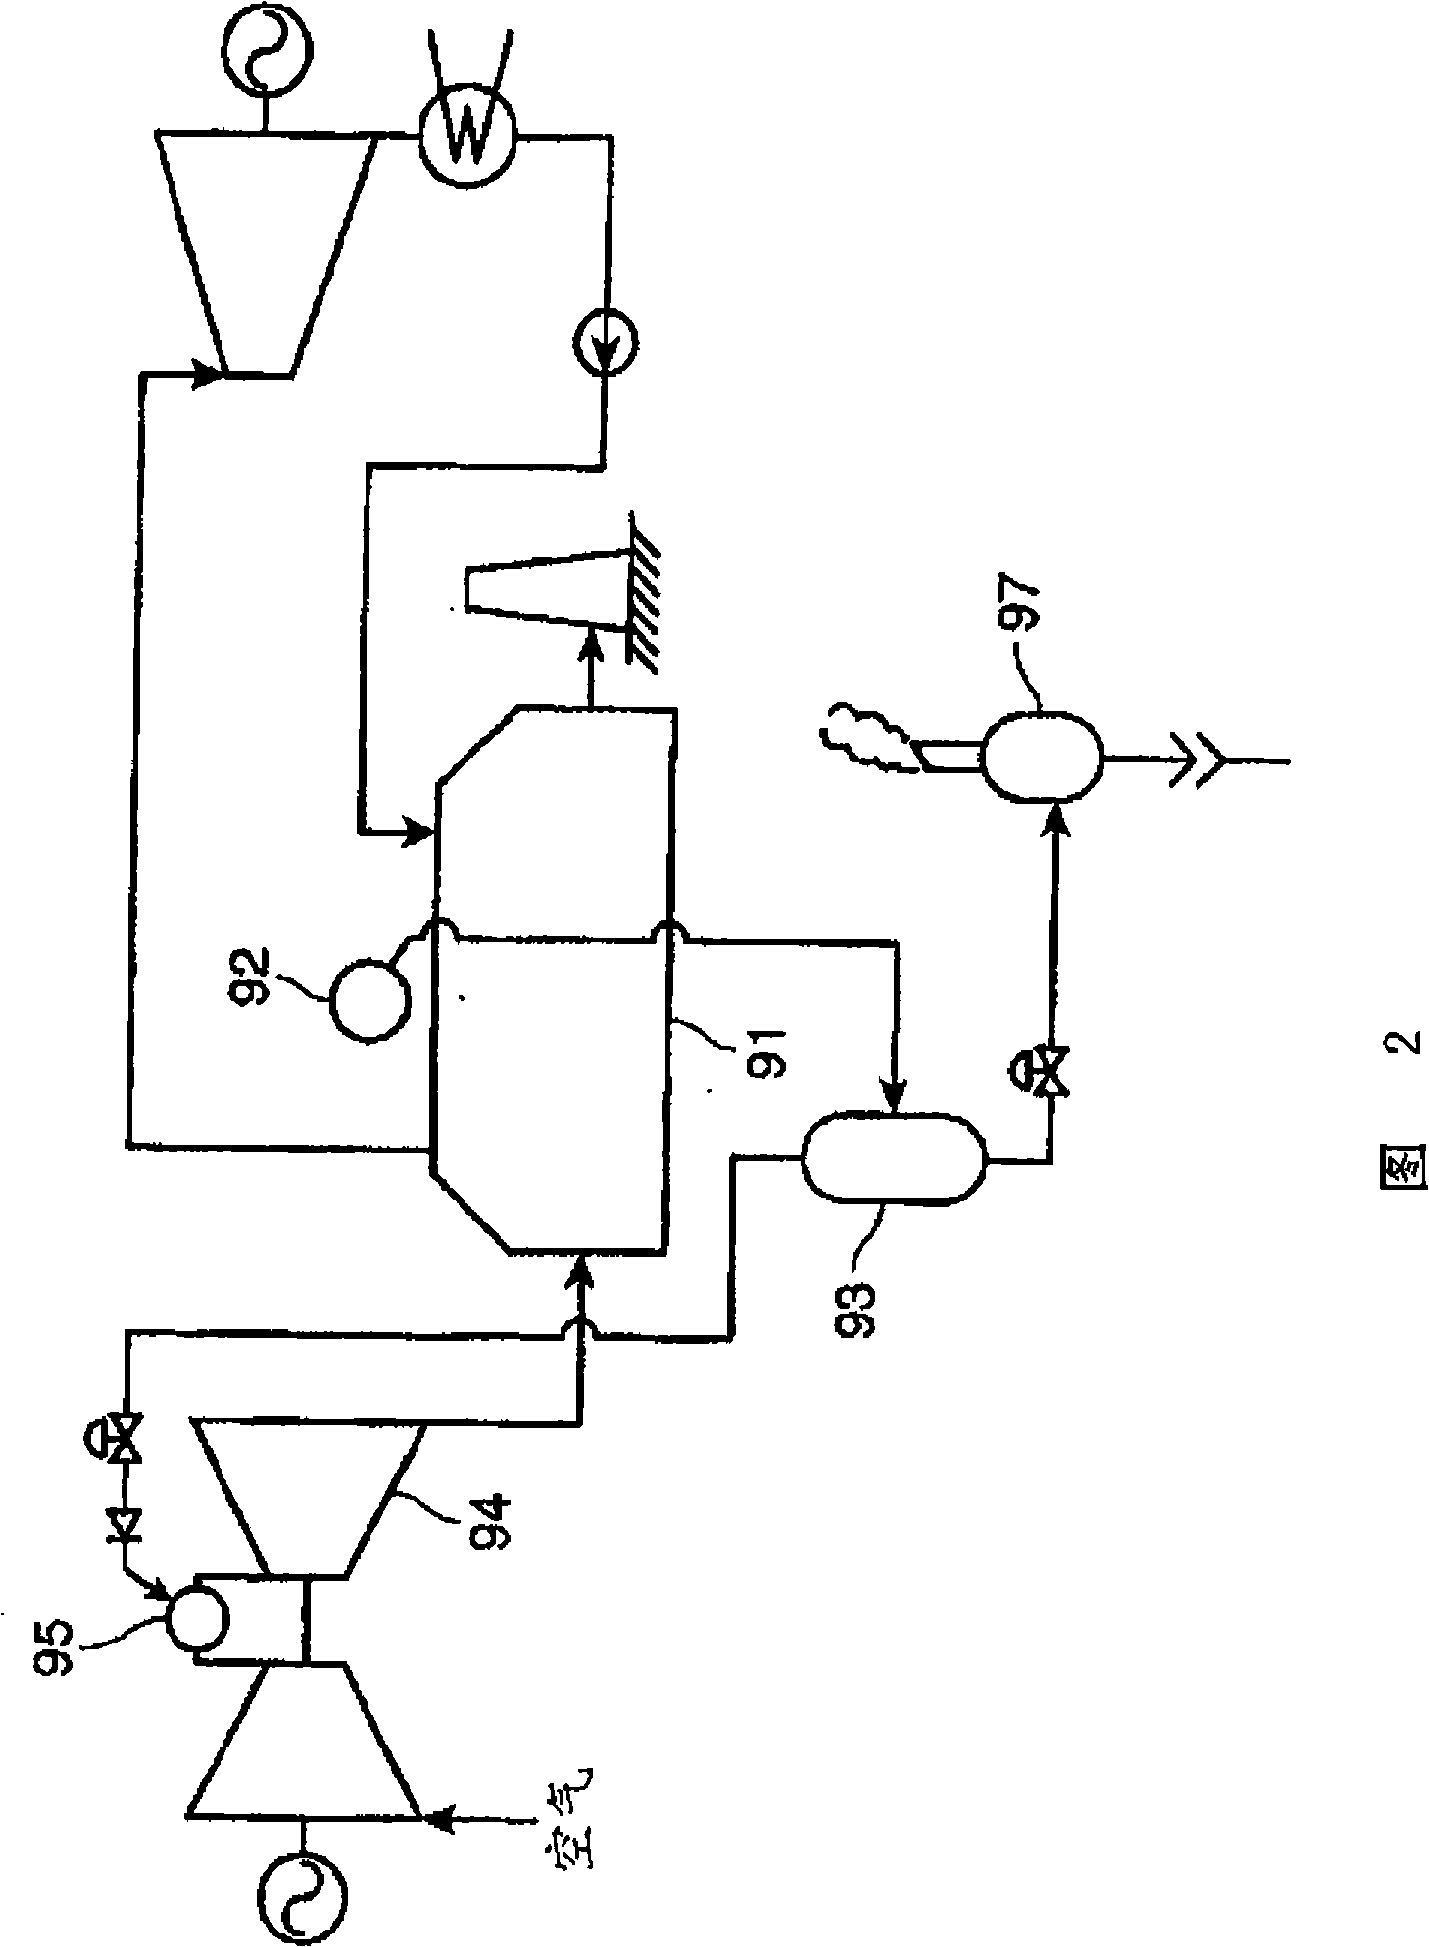 Thermal water utilization device and steam treatment device